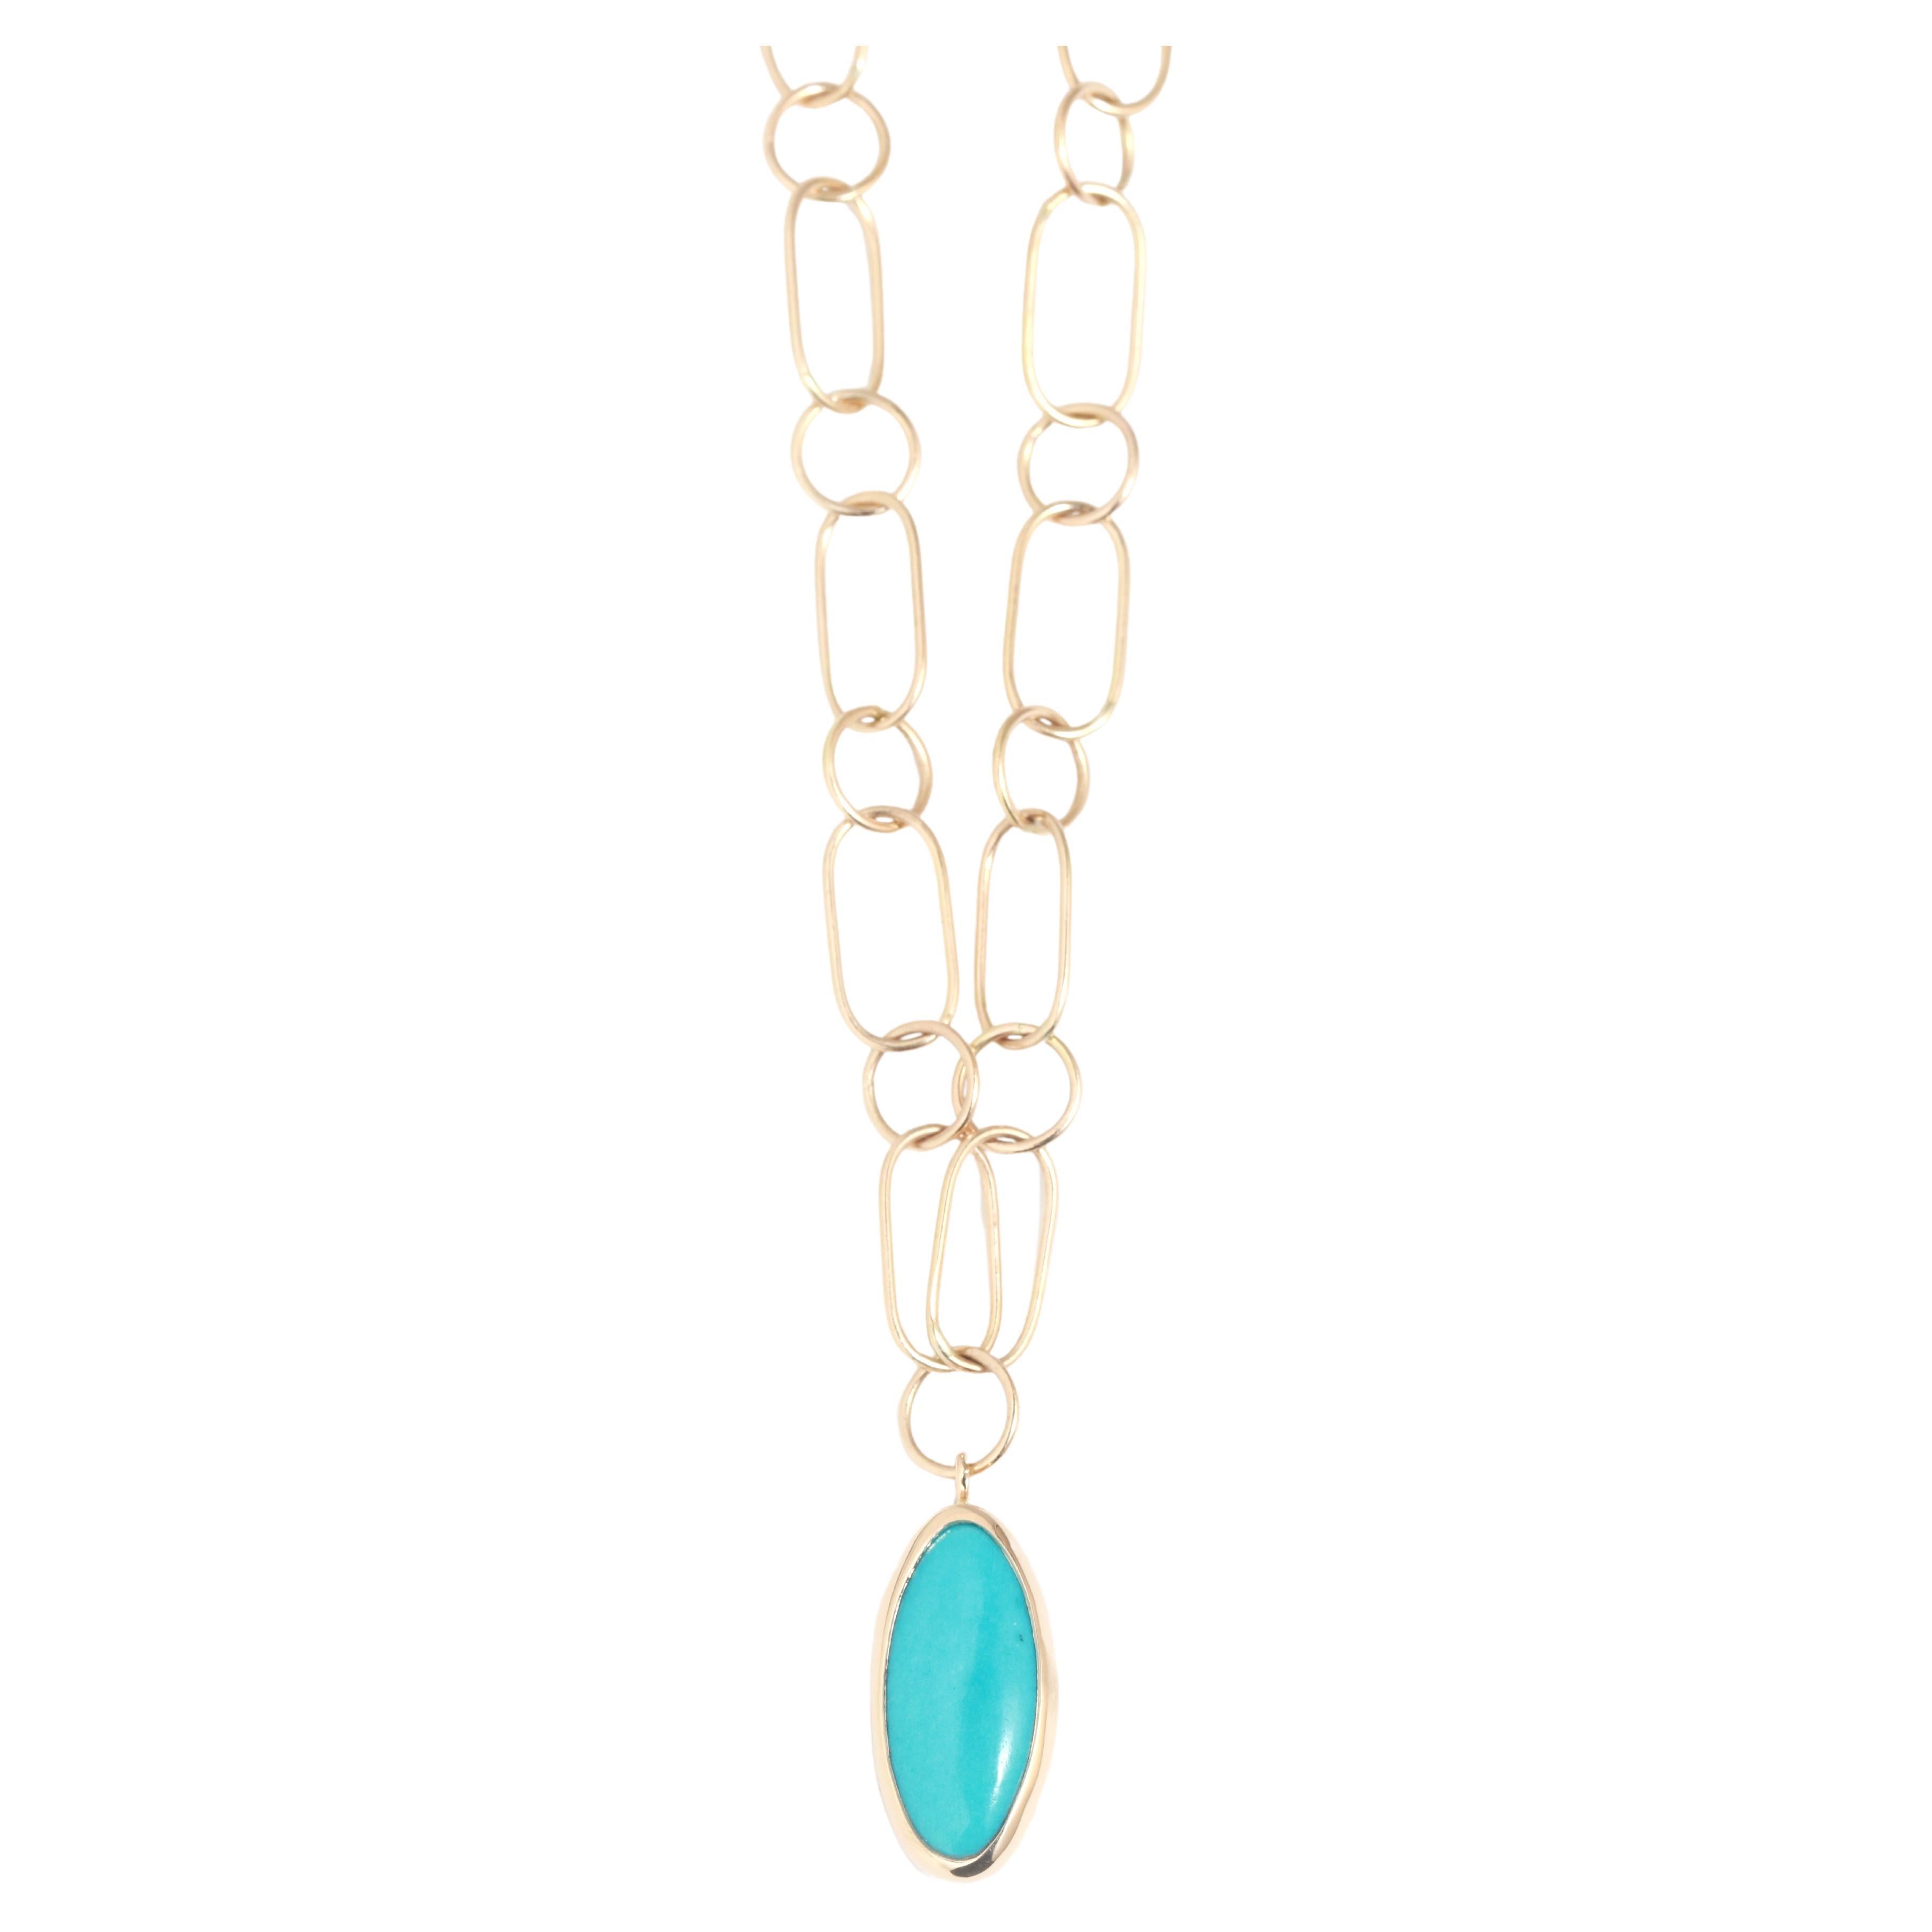 14k Yellow Gold Turquoise Necklace with Handmade Chain For Sale